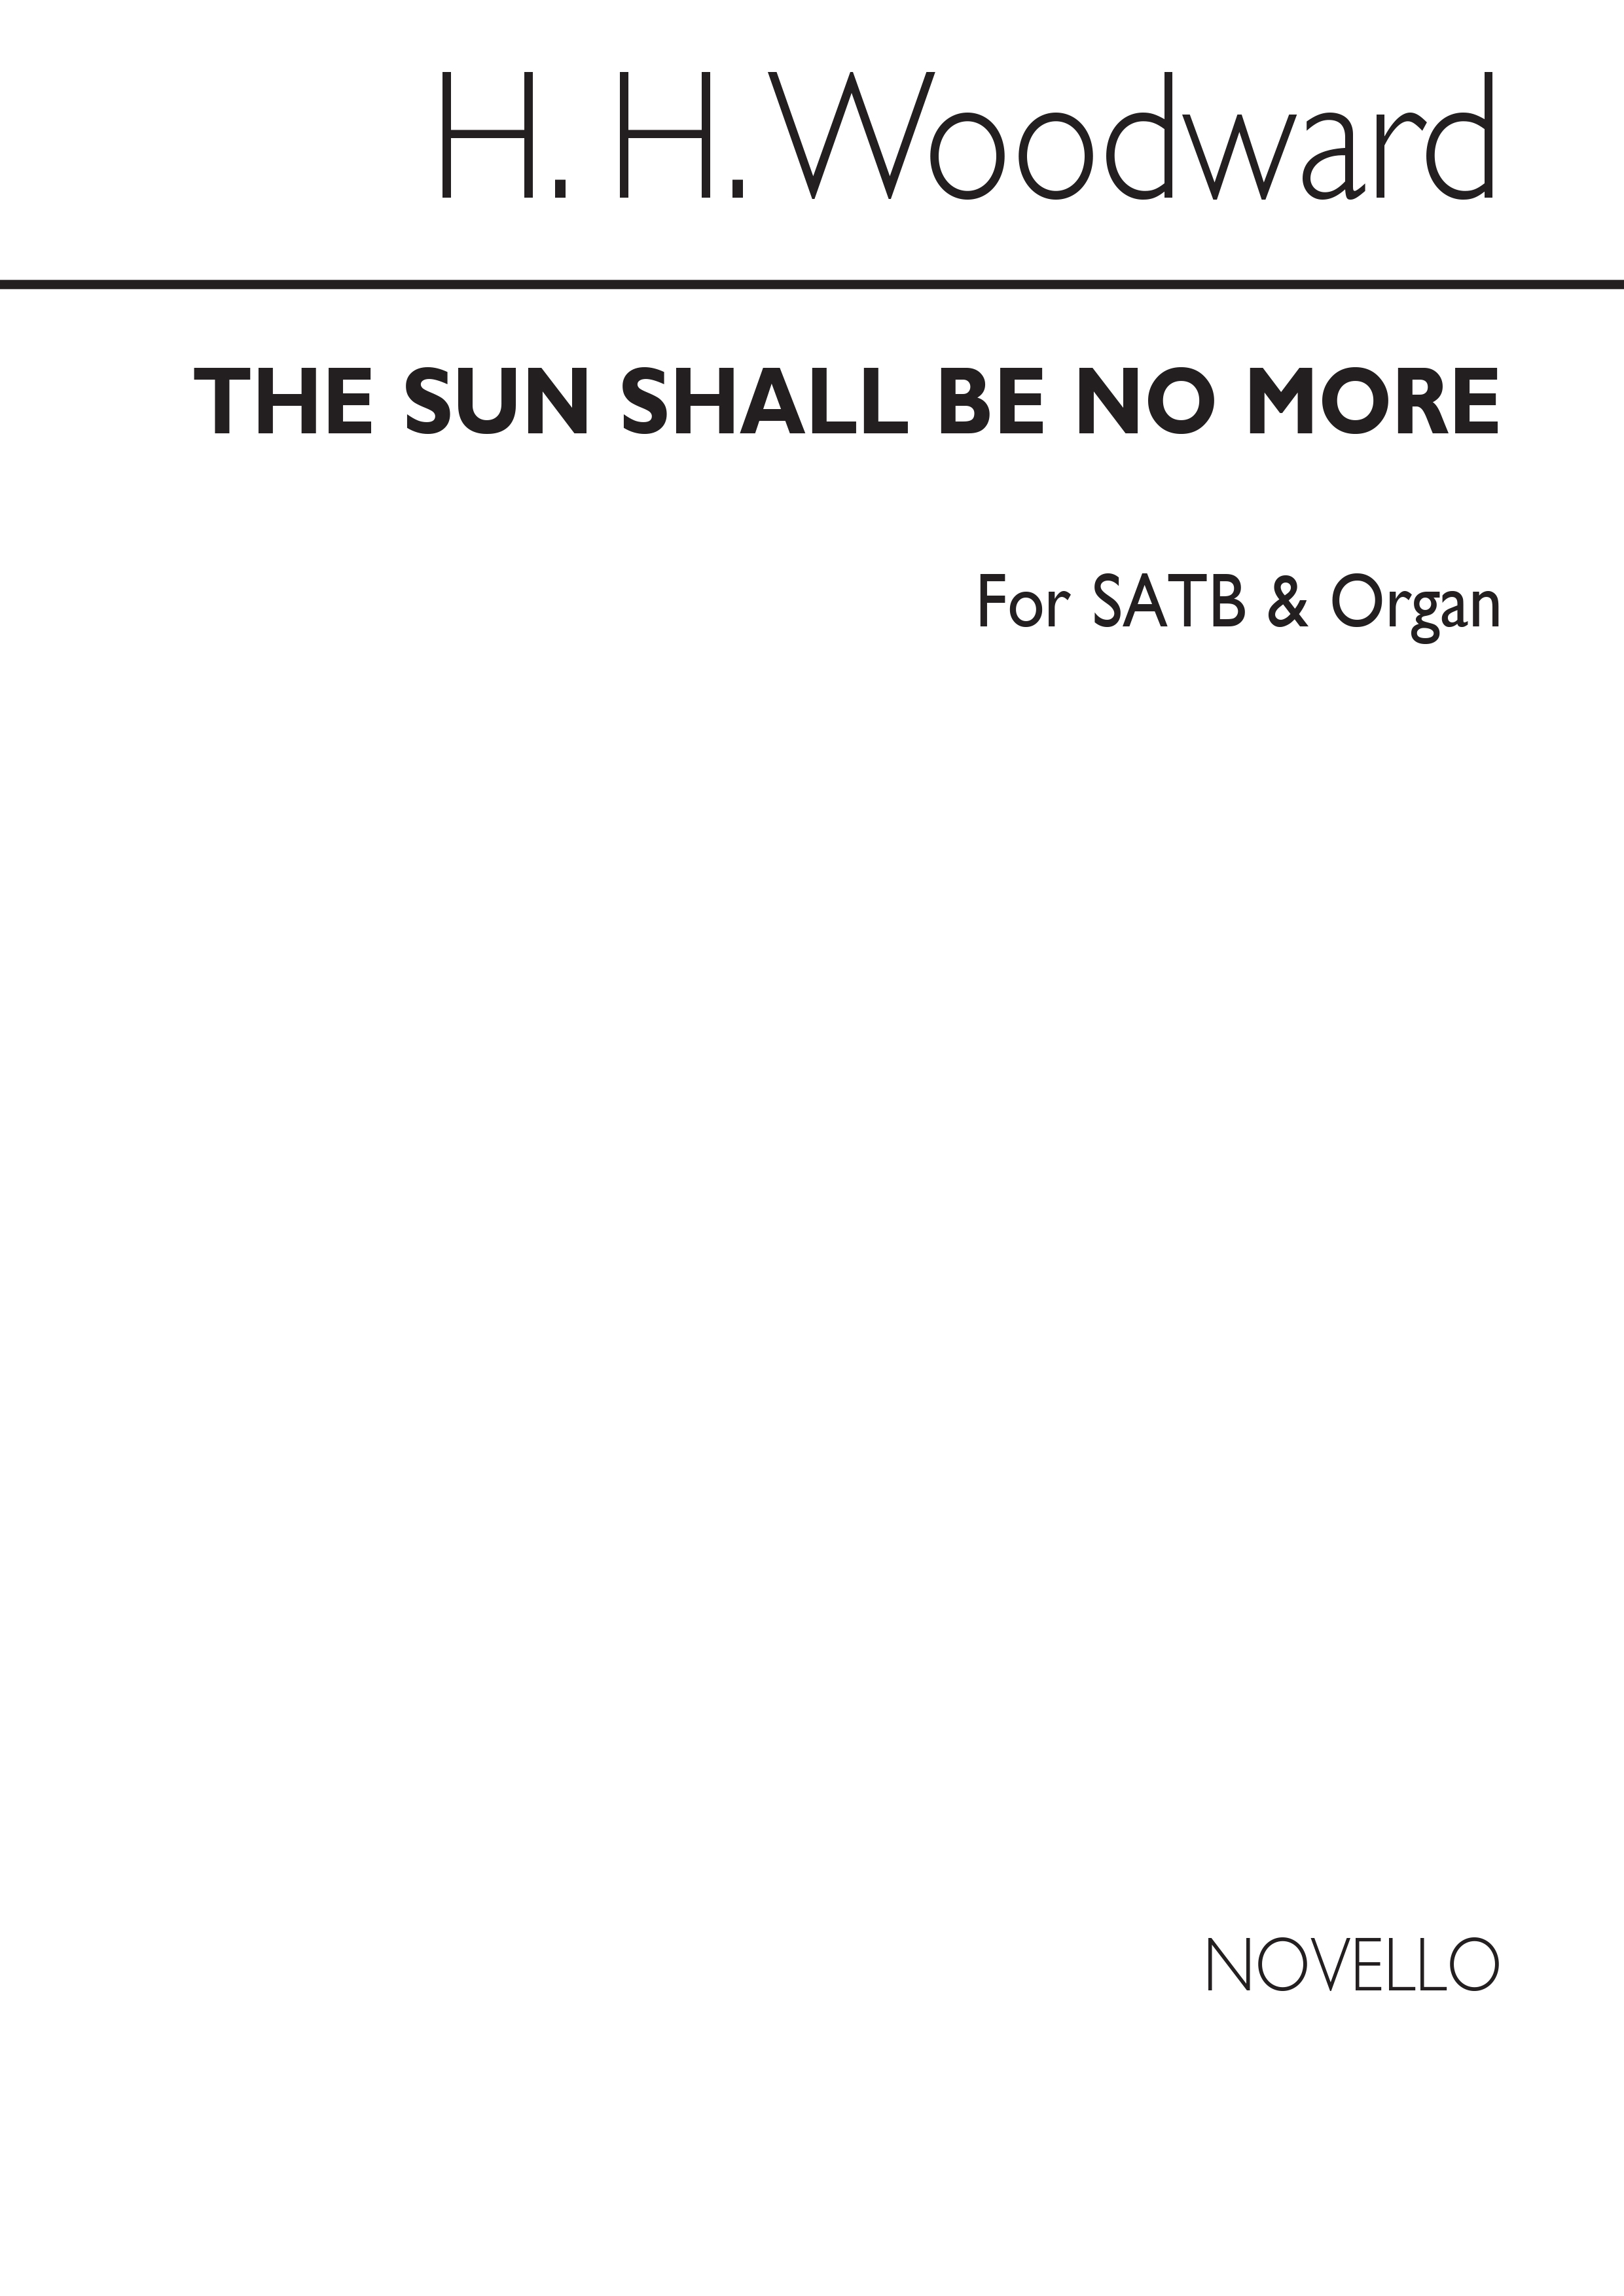 Rev. H. H. Woodward: The Sun Shall Be No More